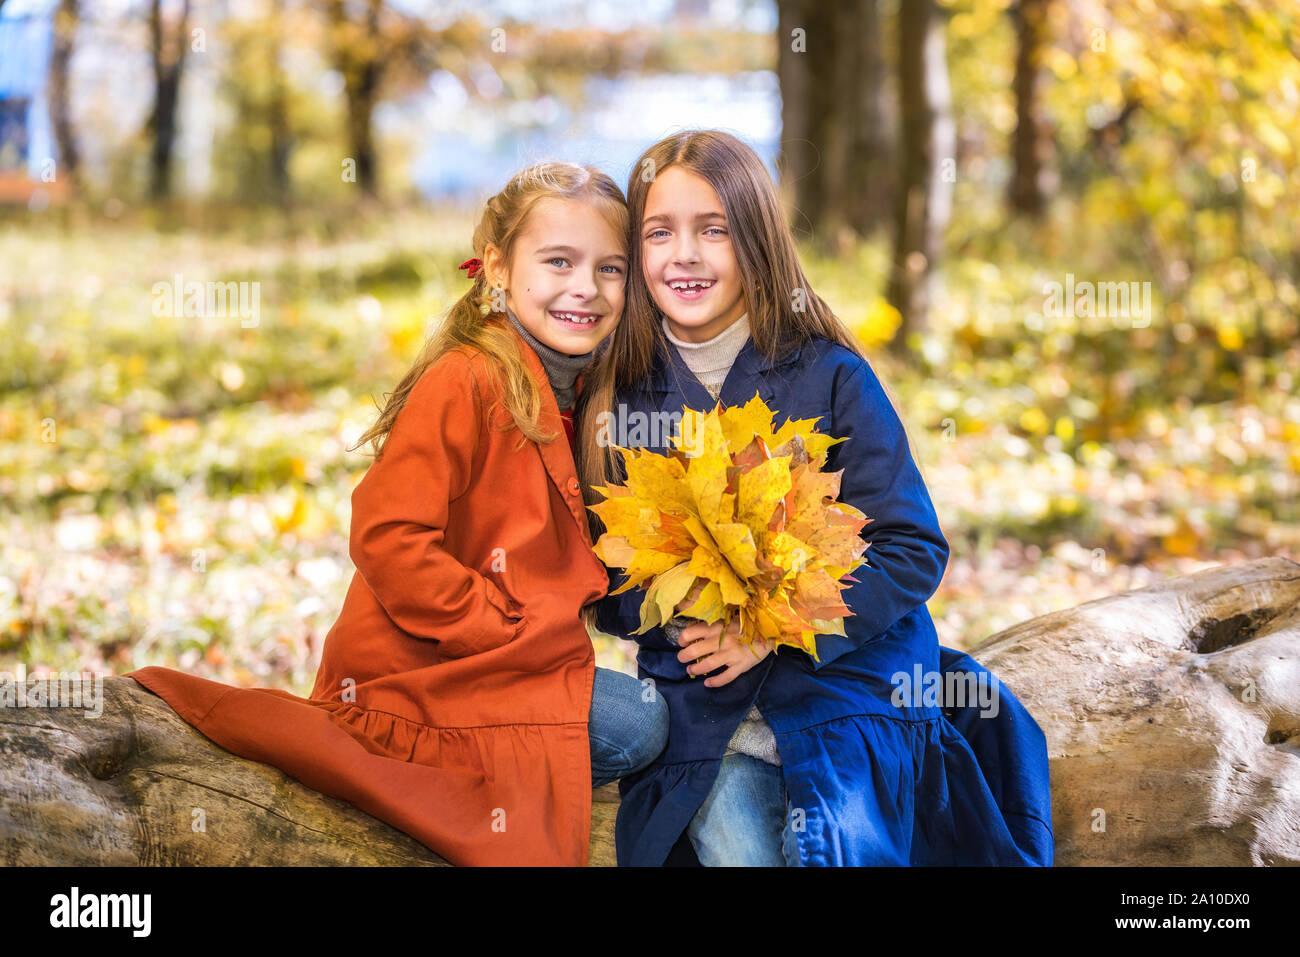 Two cute smiling 8 years old girls posing together in a park on a sunny autumn day. Stock Photo